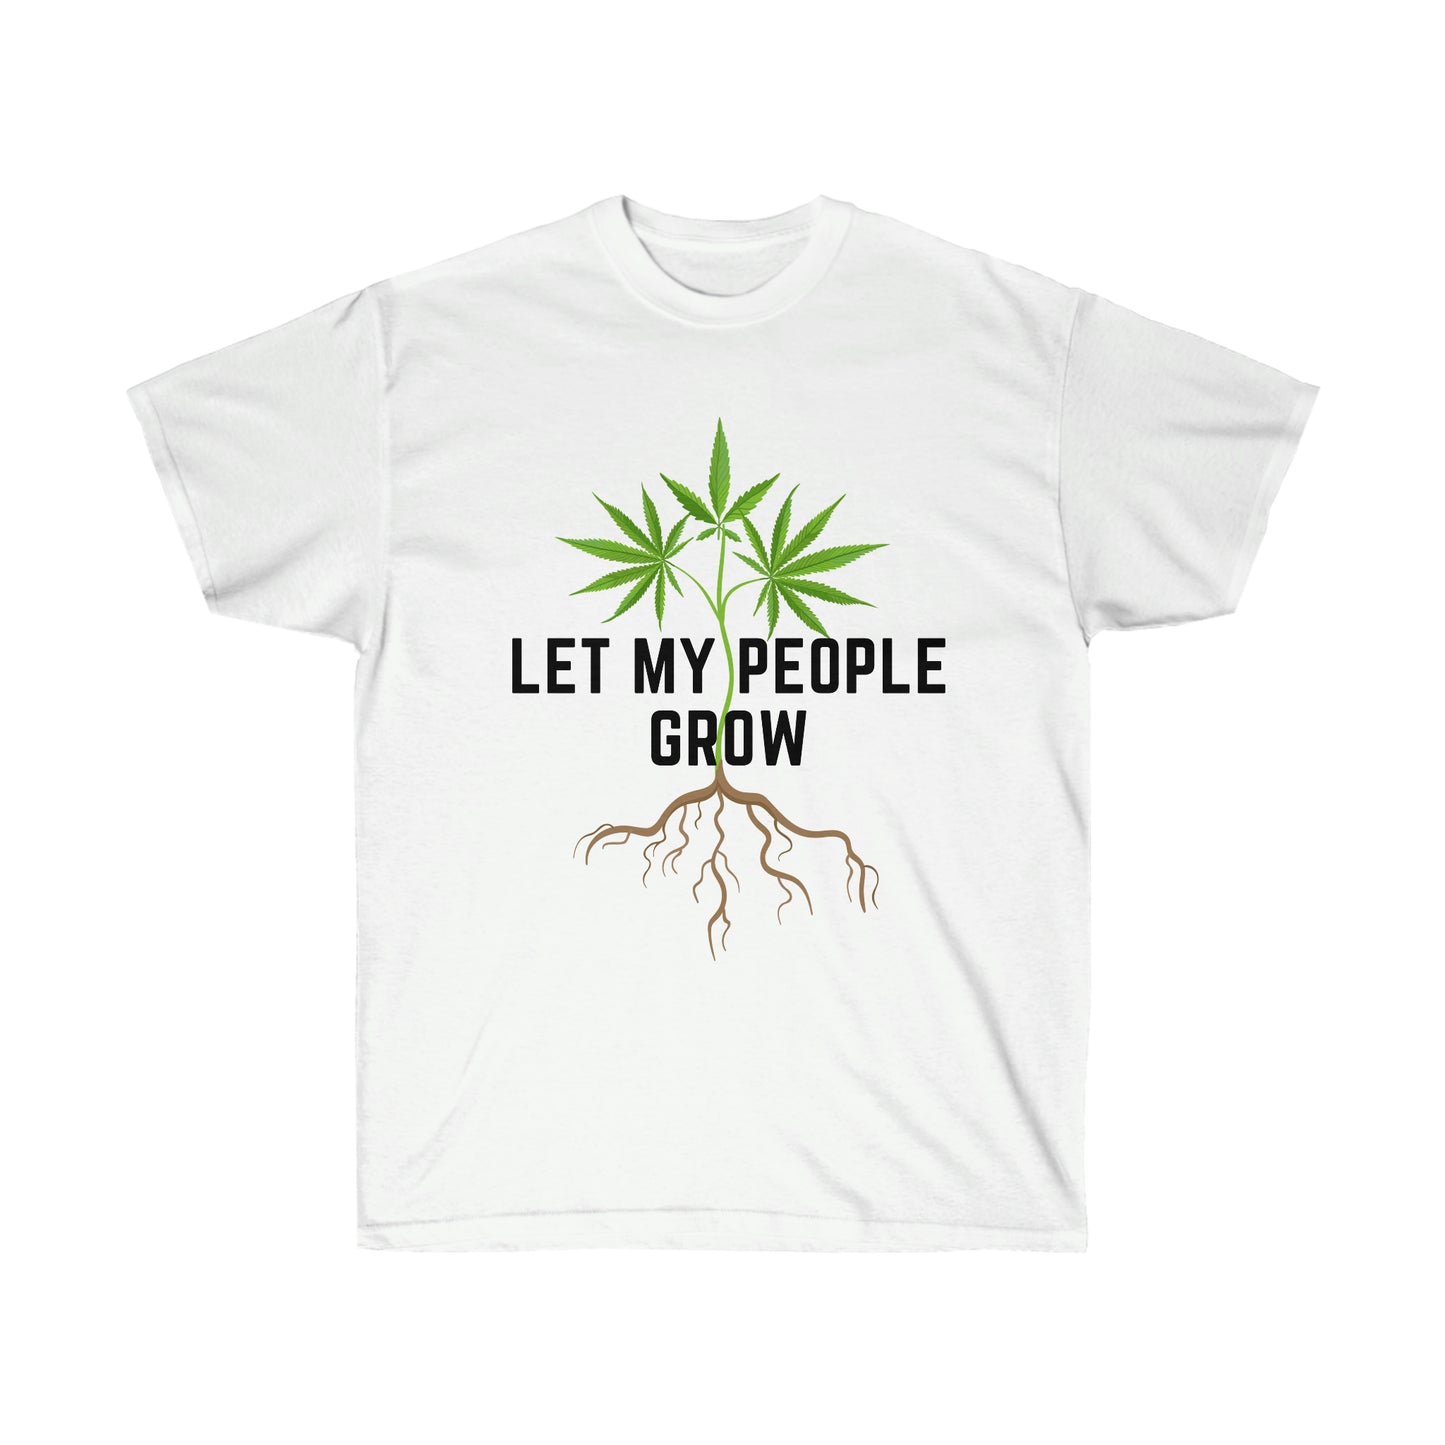 Let the Let My People Grow T-Shirt.